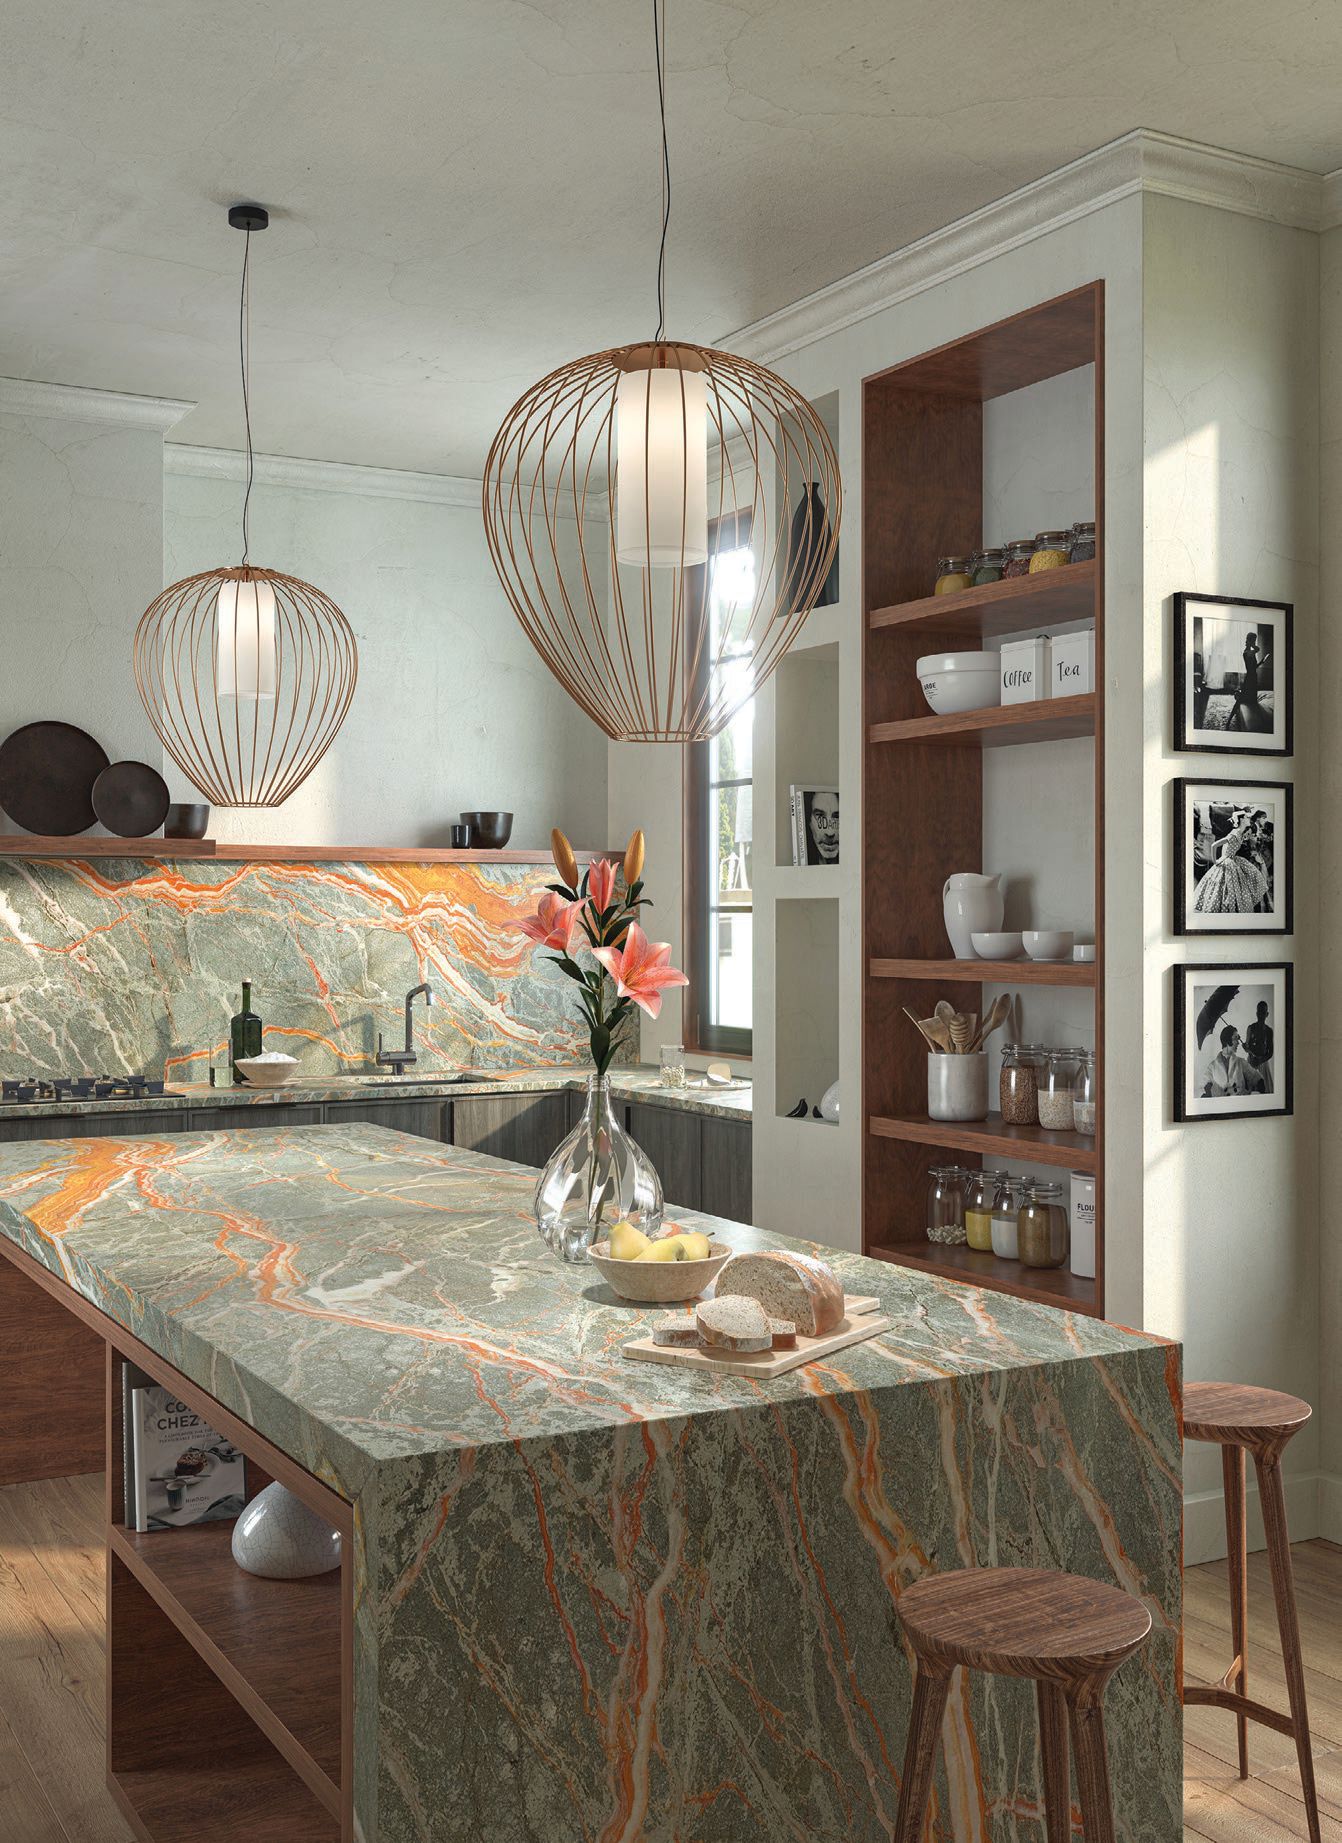 A Christopher Peacock kitchen featuring Artistic Tile’s Tiger Lily polished stone PHOTO COURTESY OF BRANDS